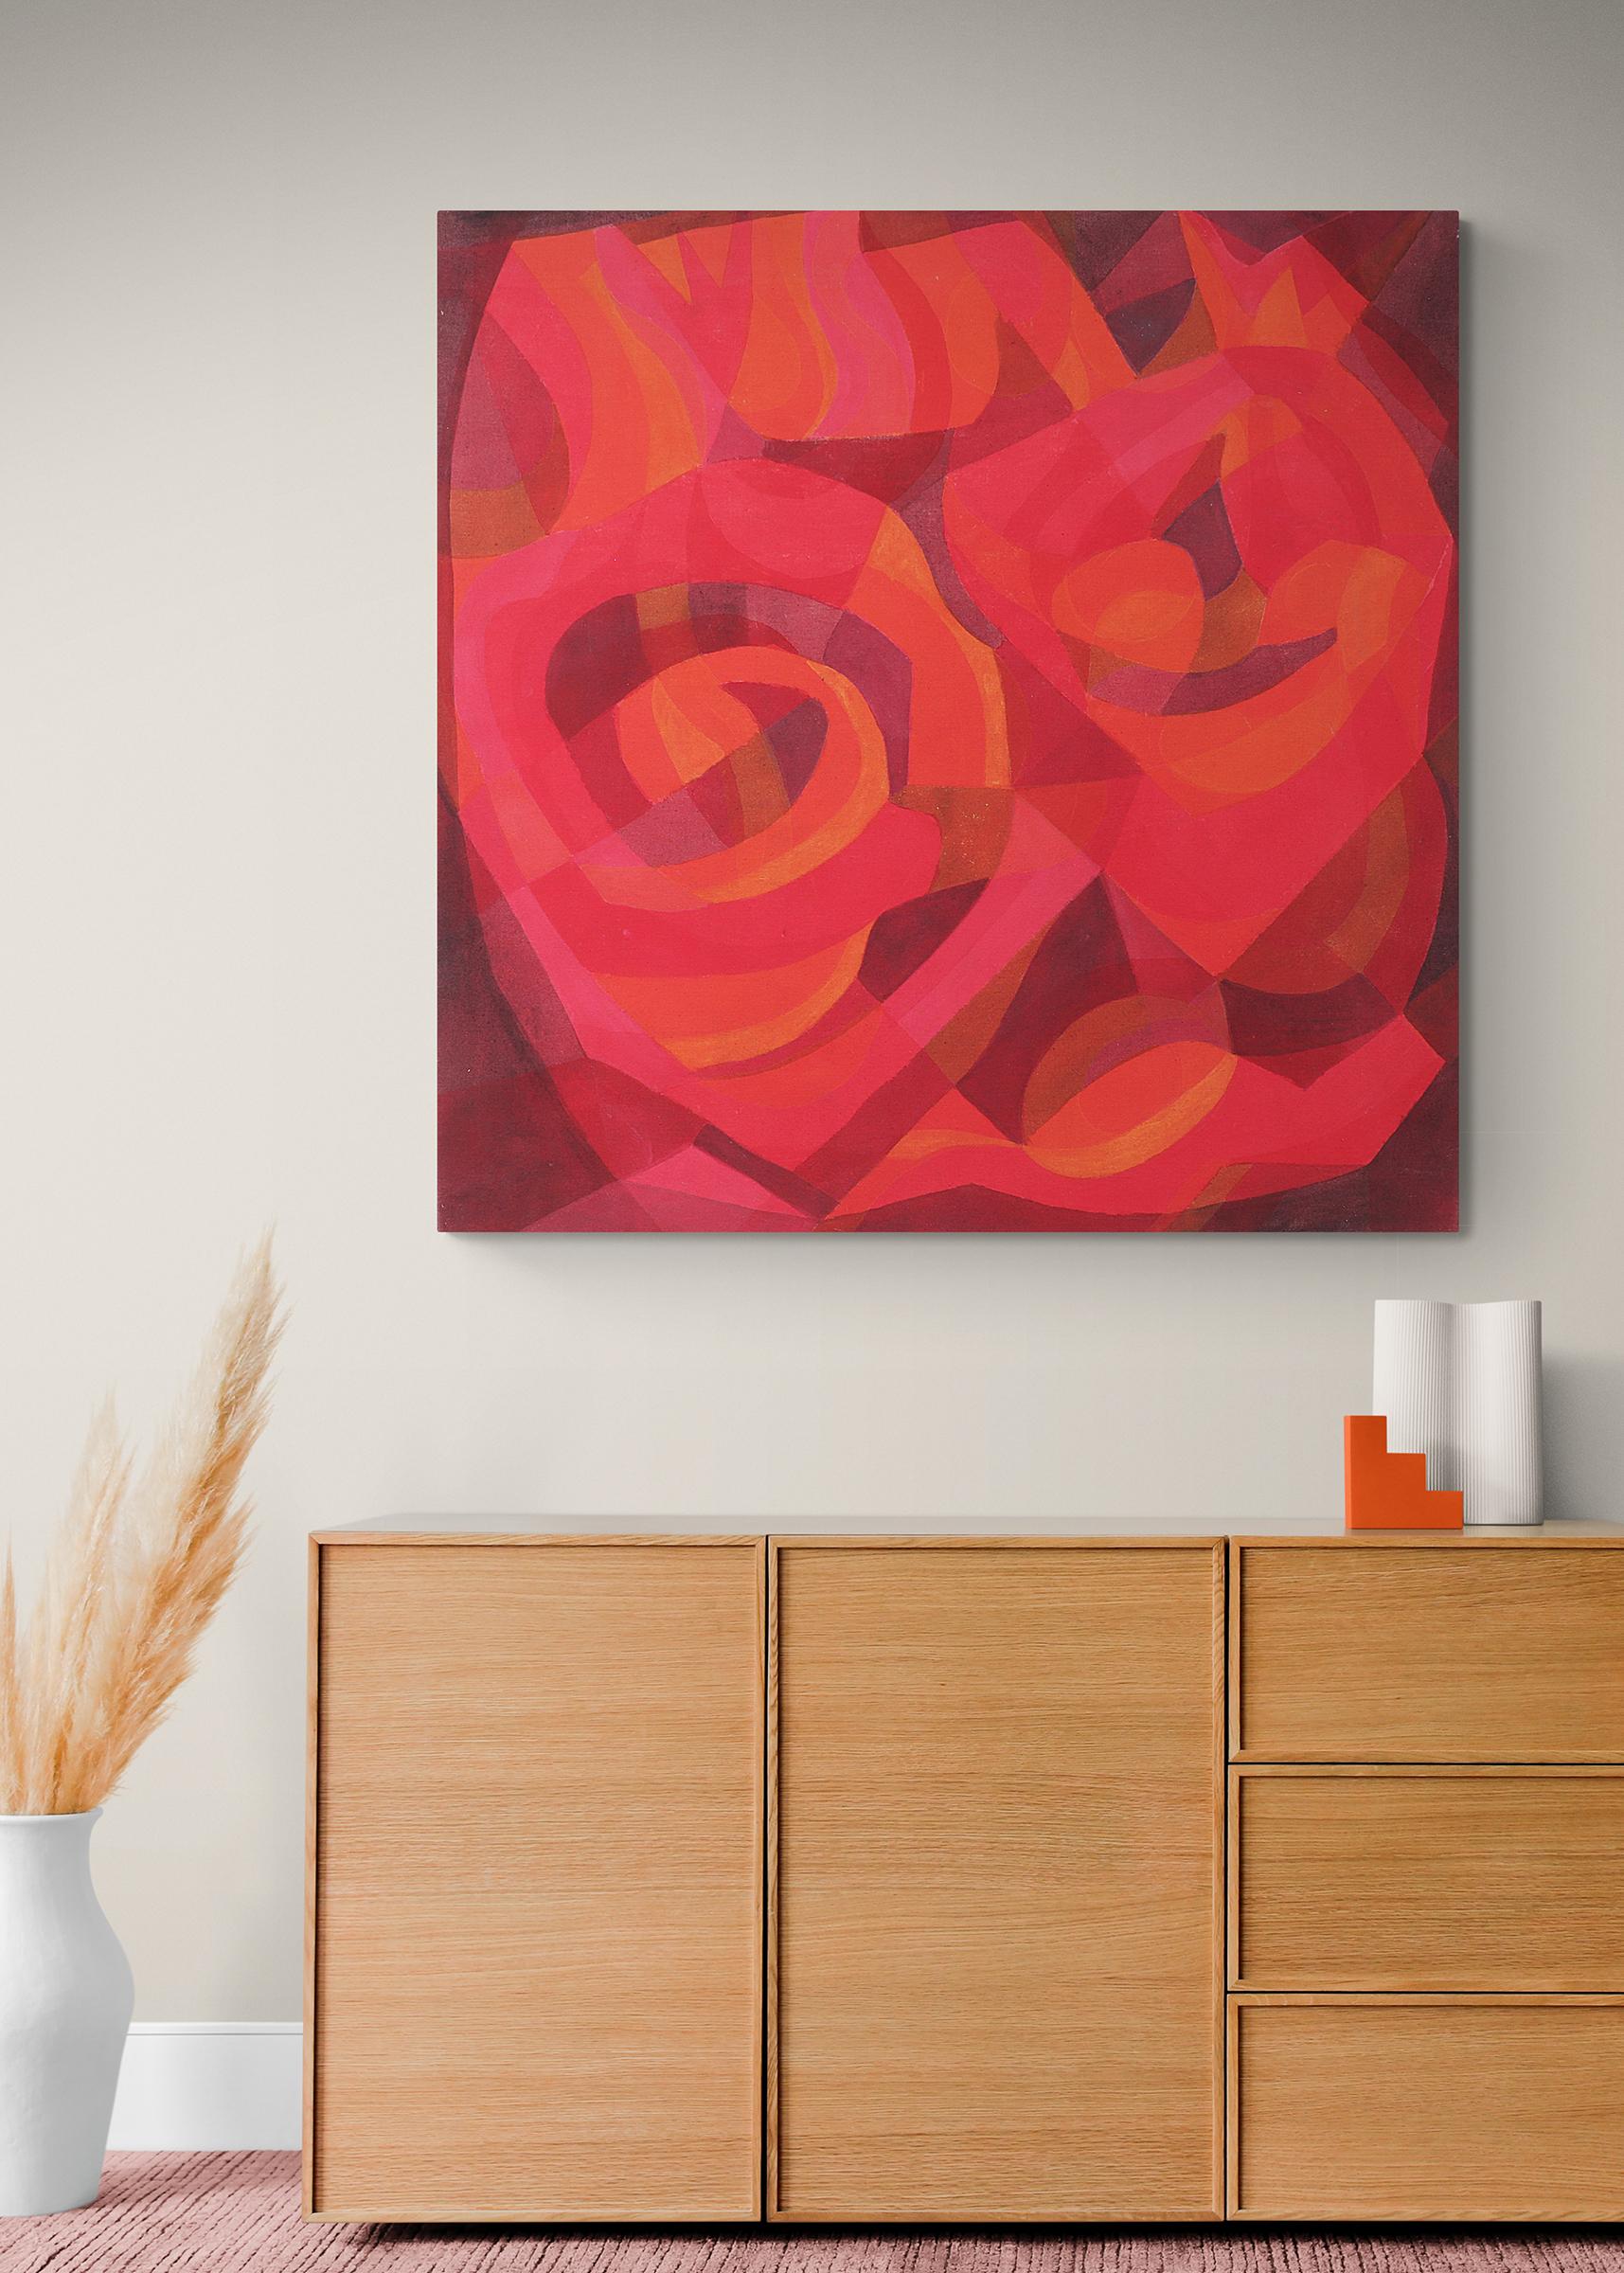 Revolving Sundown, 1980s Red and Orange Abstract Acrylic on Canvas Painting  For Sale 5